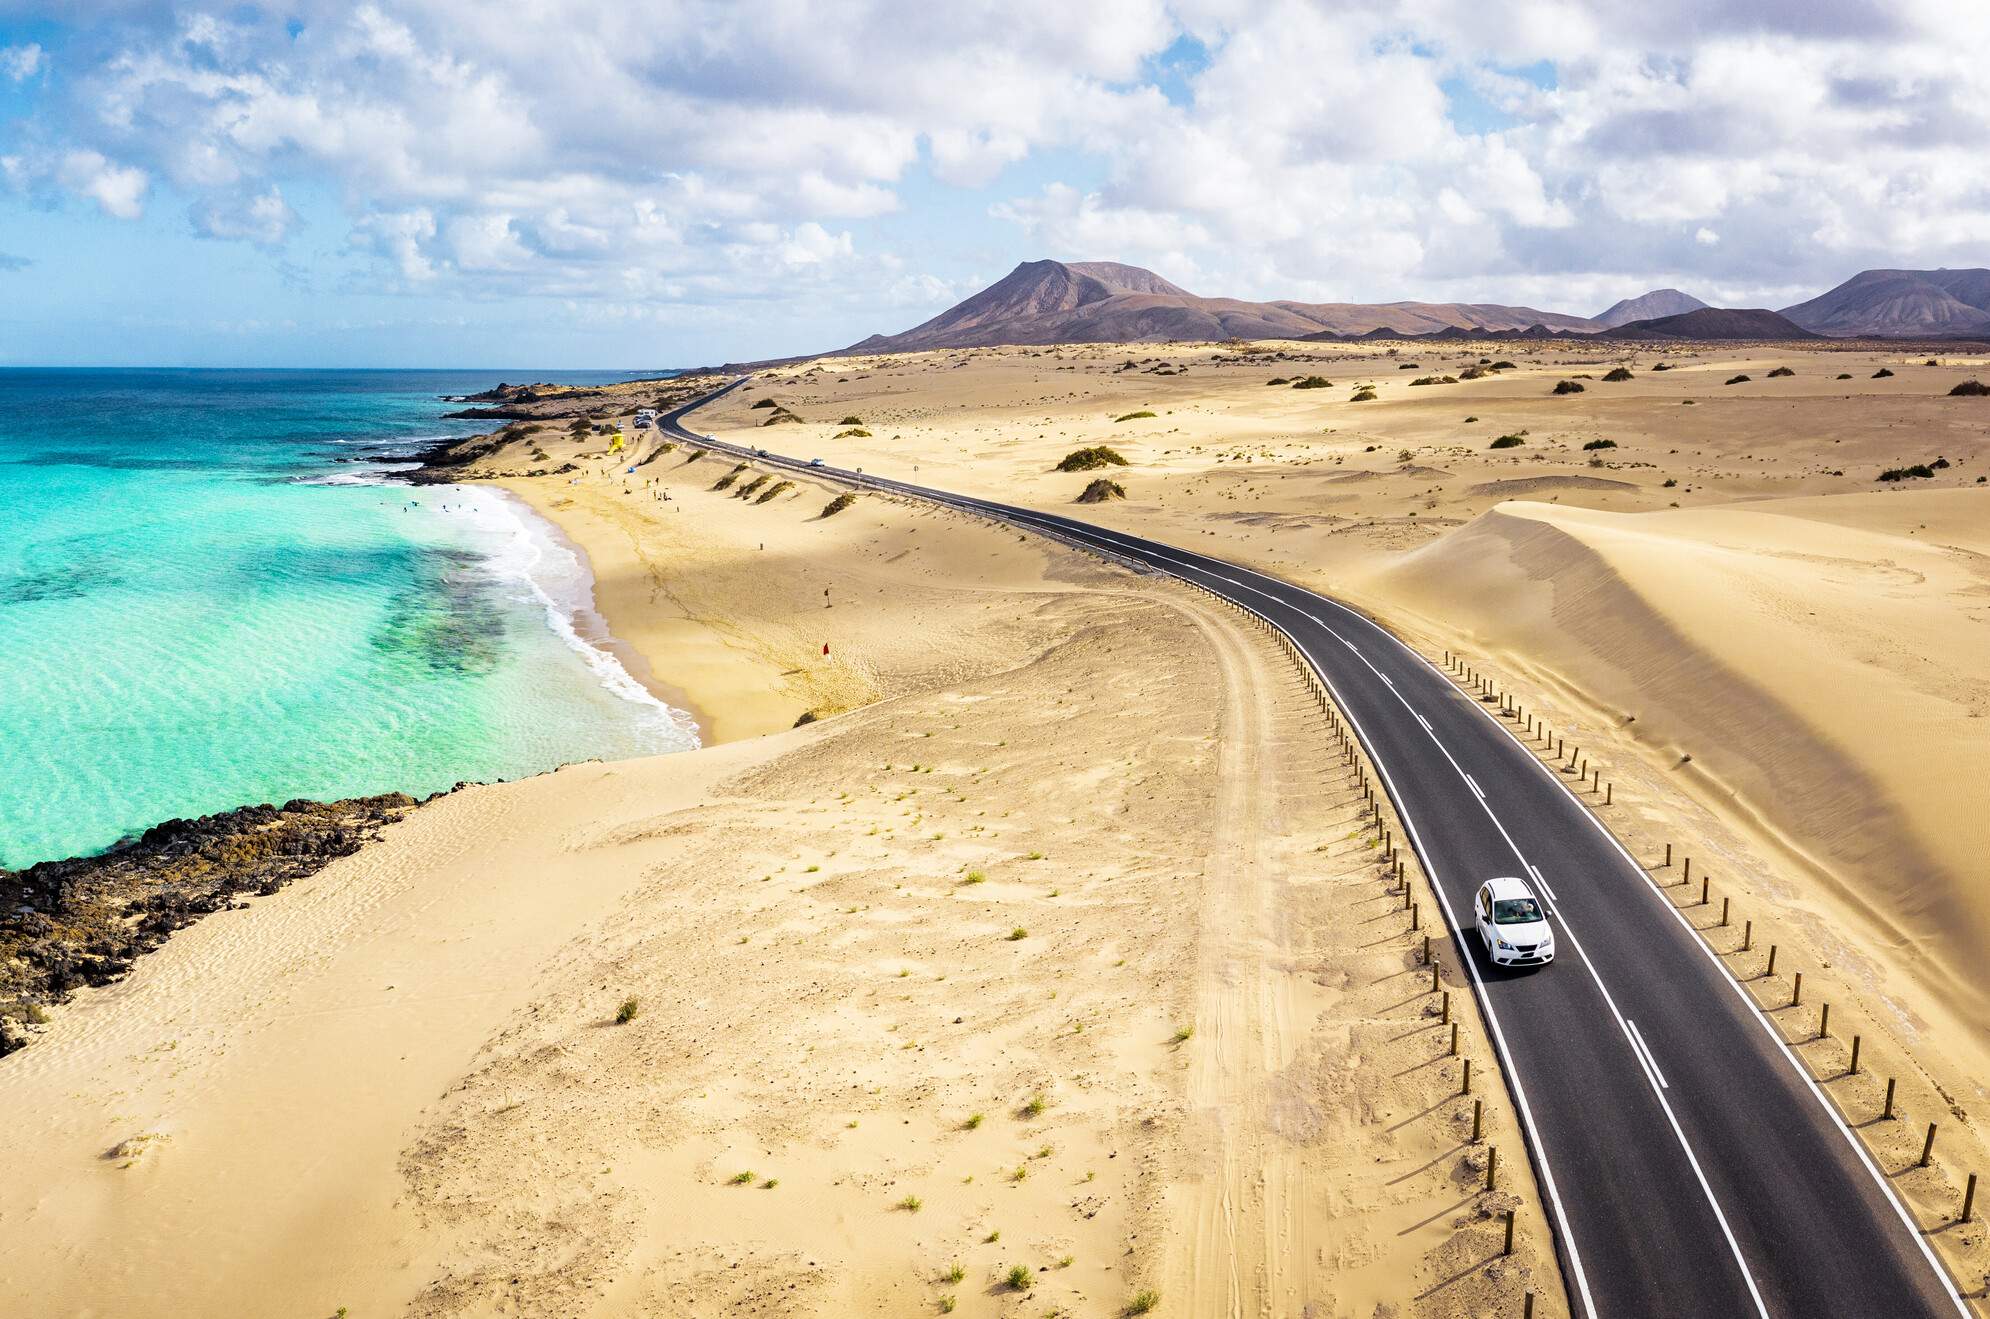 Aerial view of car driving on desert road by the turquoise sea, Corralejo Natural Park, Fuerteventura, Canary Islands, Spain